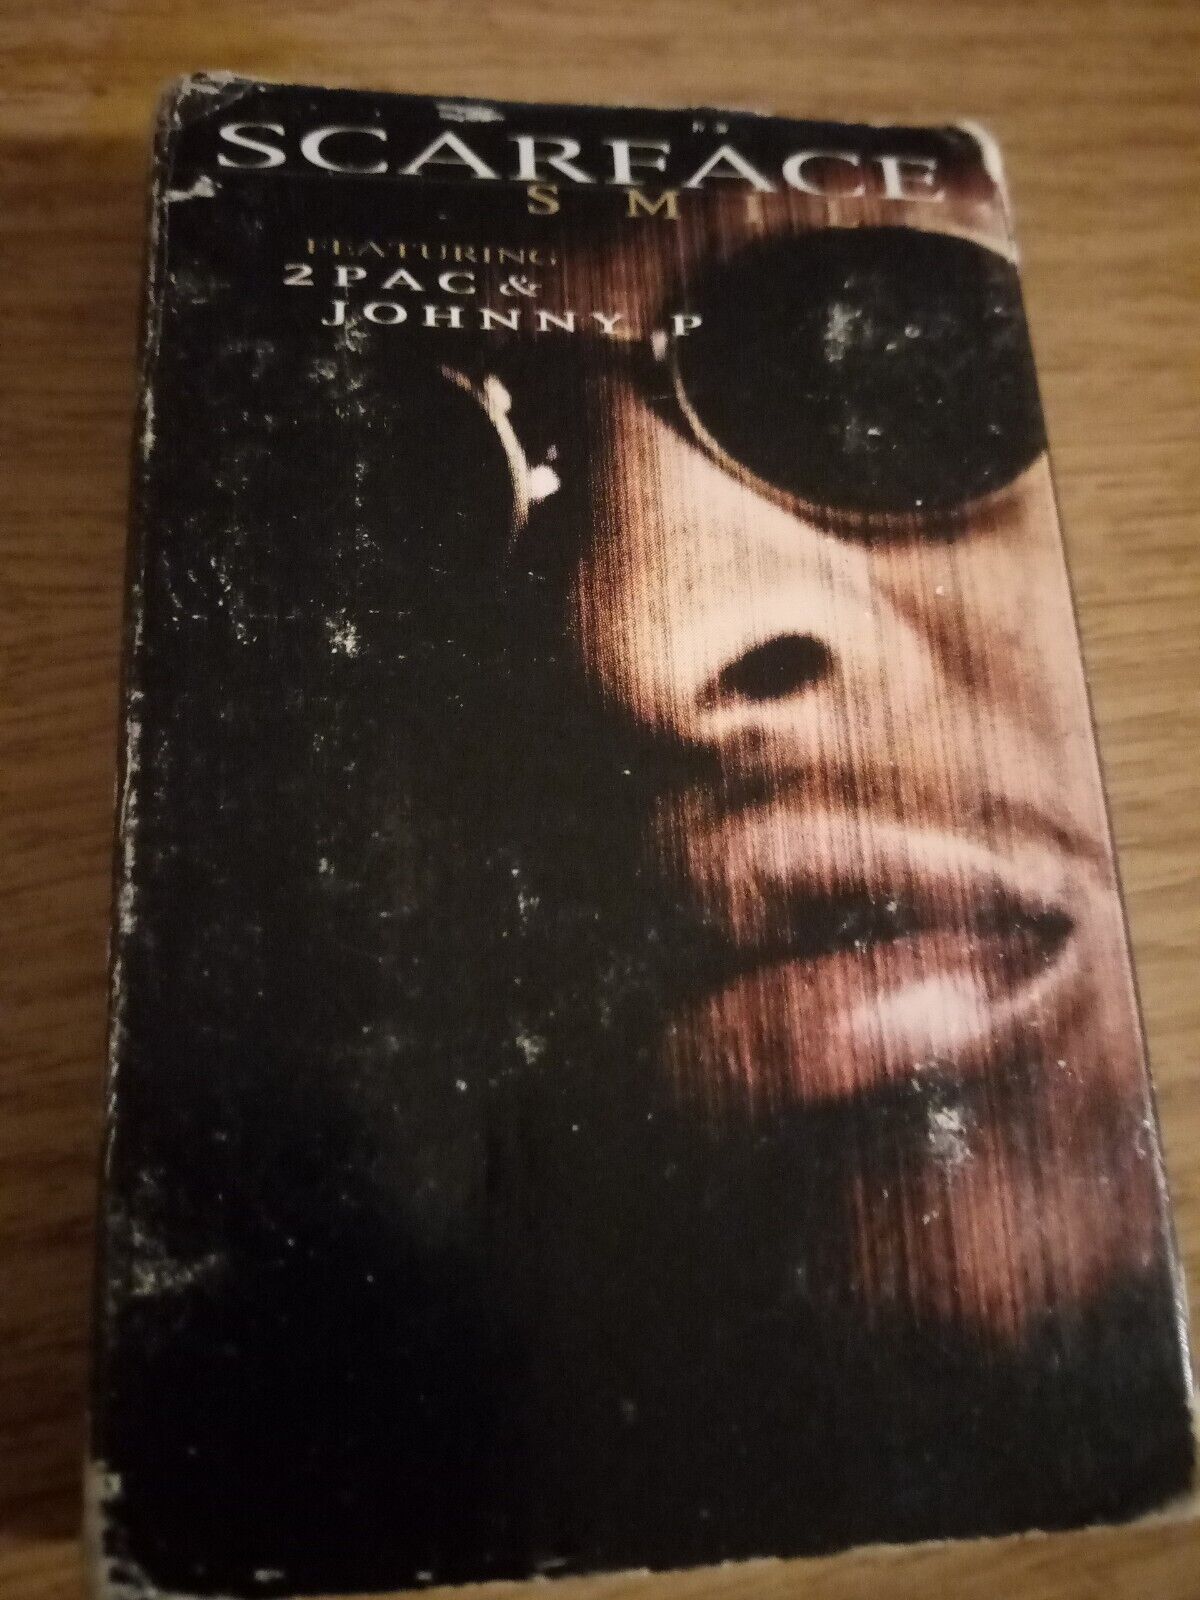 Scarface featuring 2Pac & Johnny P - Smile - Cassette Tape Single - TESTED